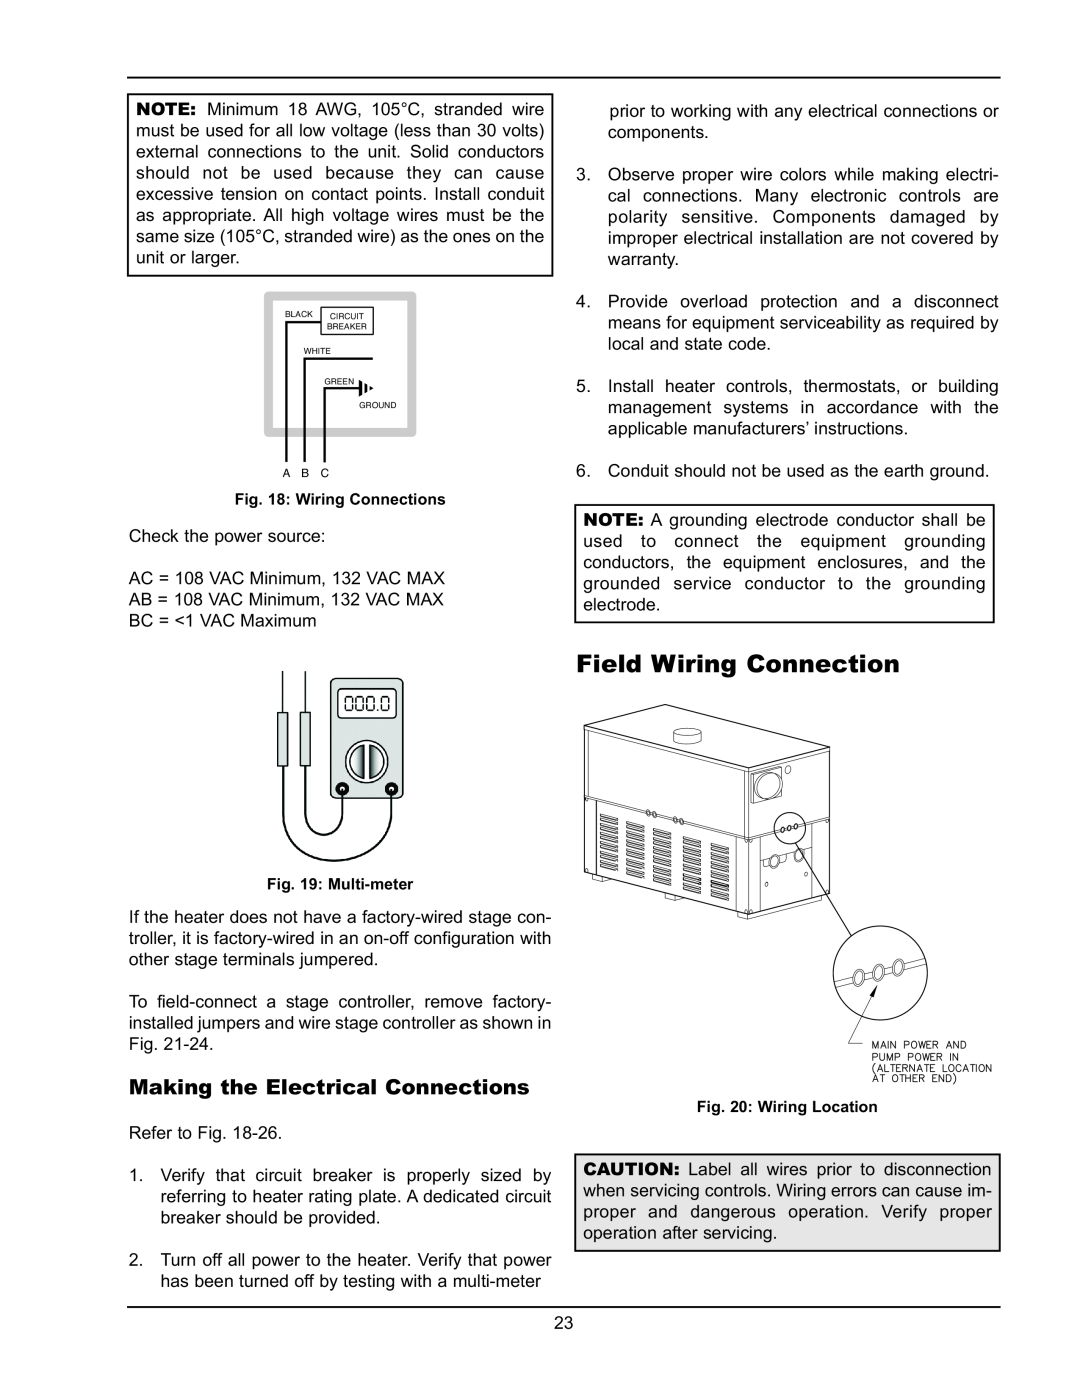 Raypak 992B-1262B manual Field Wiring Connection, Making the Electrical Connections 